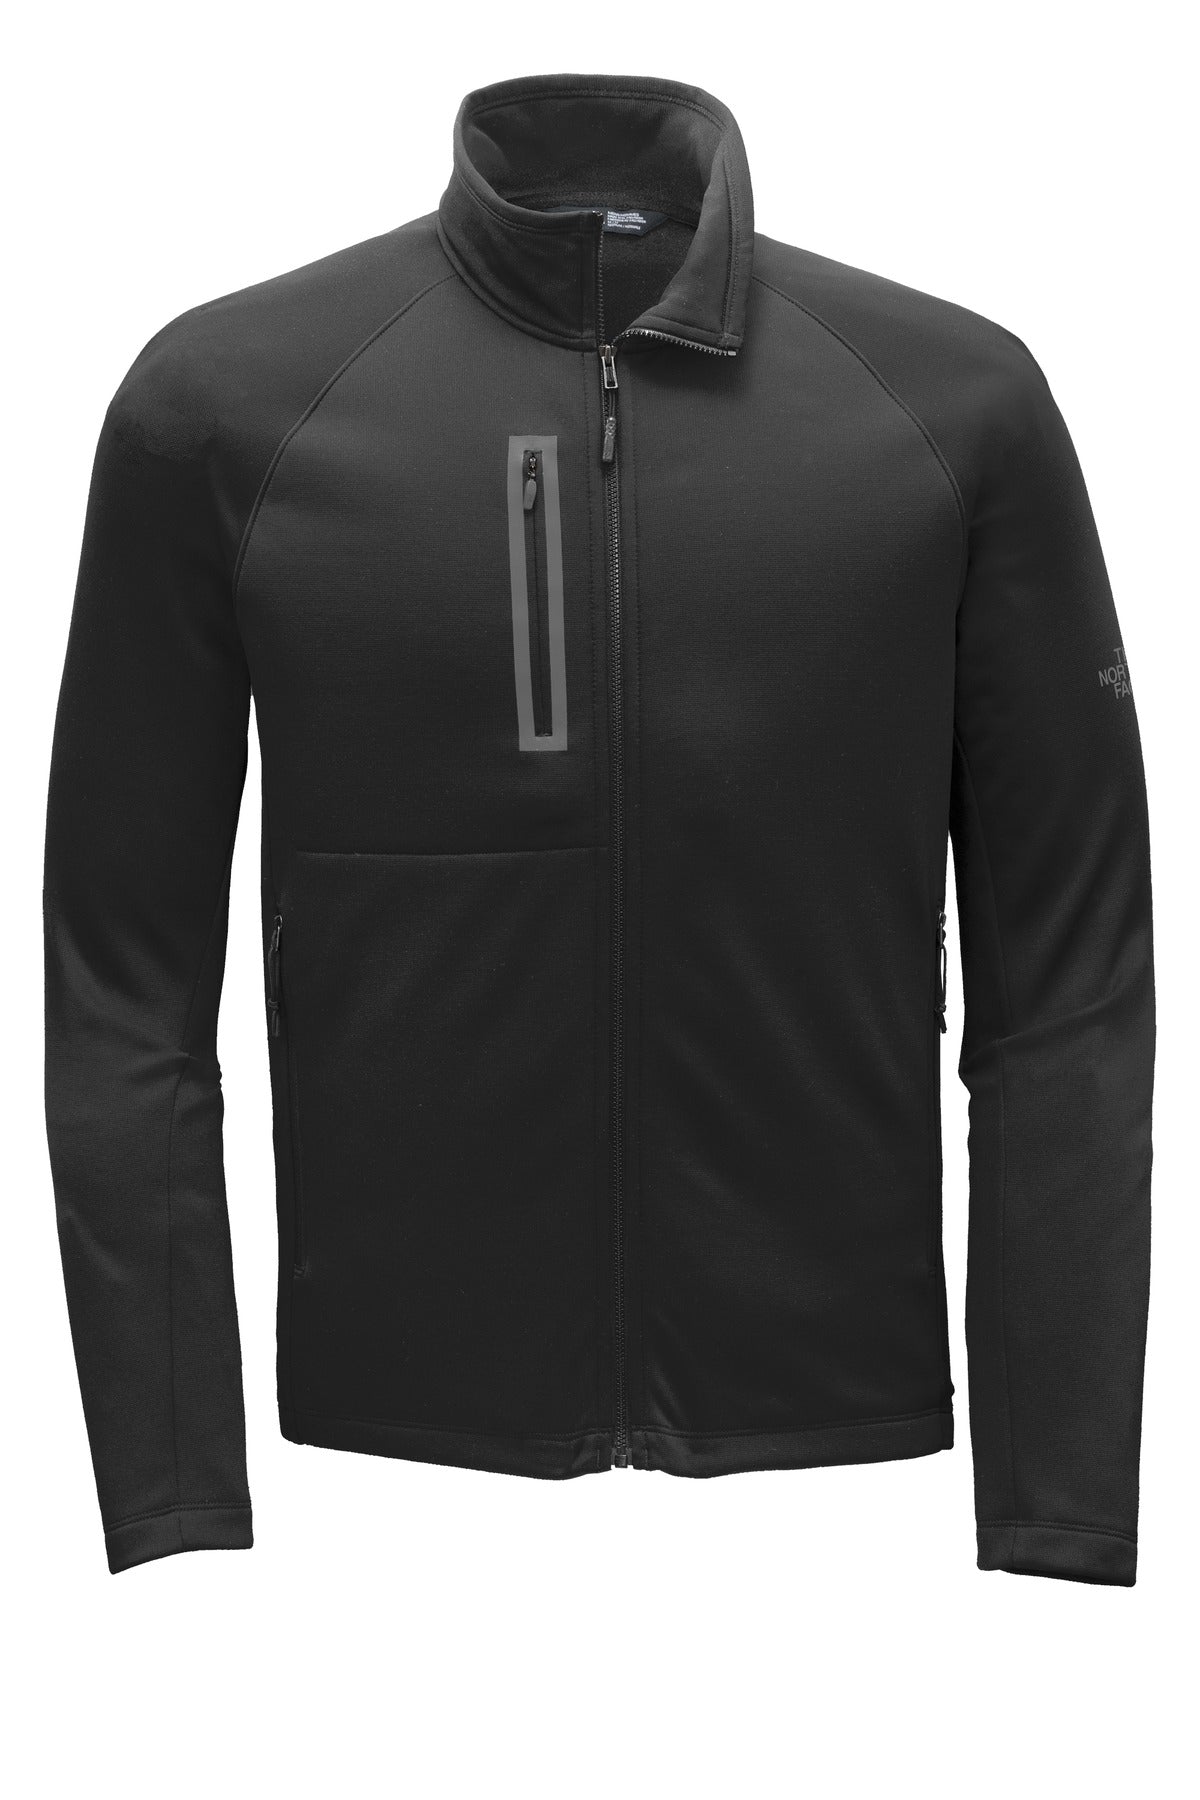 The North Face Canyon Flats Fleece Jacket. NF0A3LH9